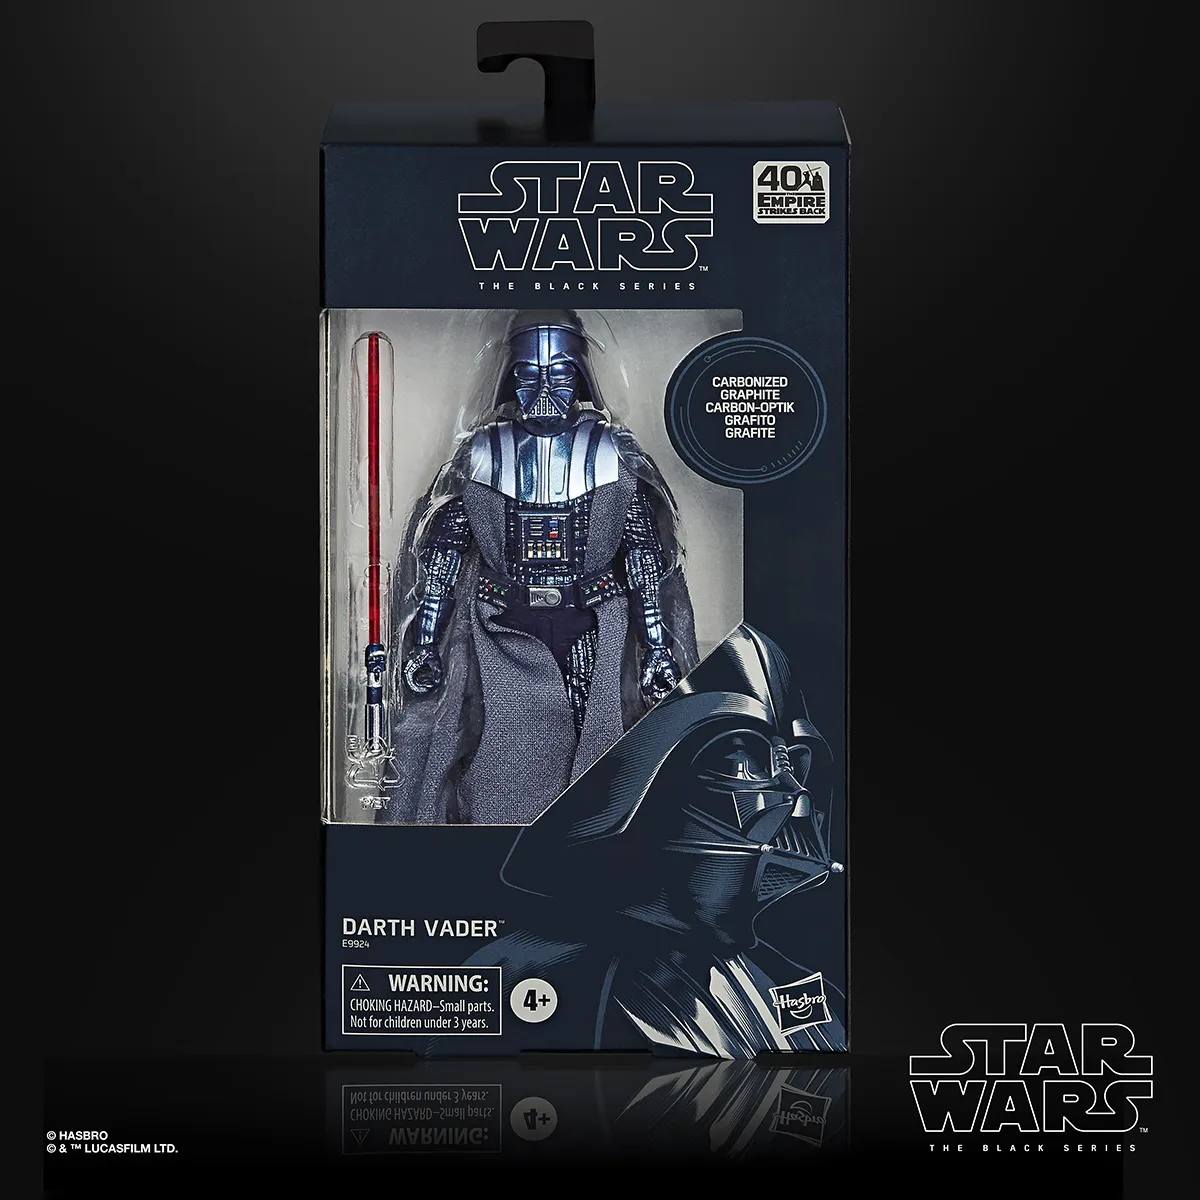 Star Wars The Black Series Carbonized Collection 6 Inch Darth Vader Figure In Pck